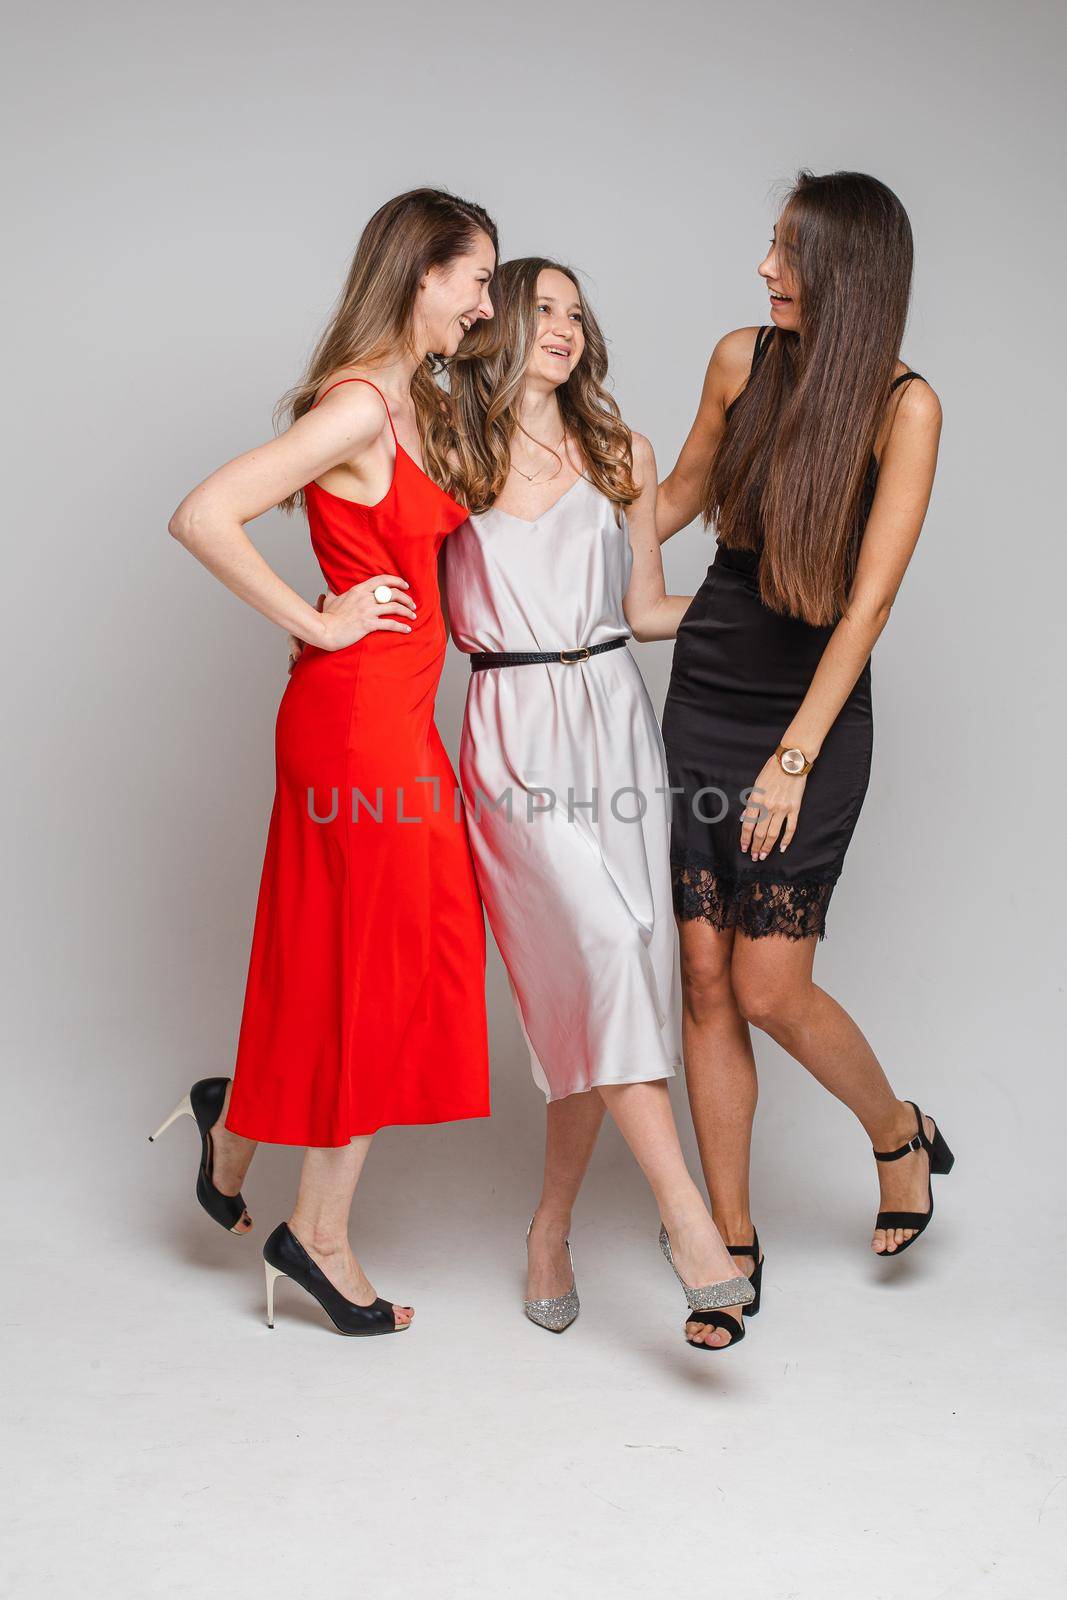 Laughing embracing women in cocktail dresses. by StudioLucky